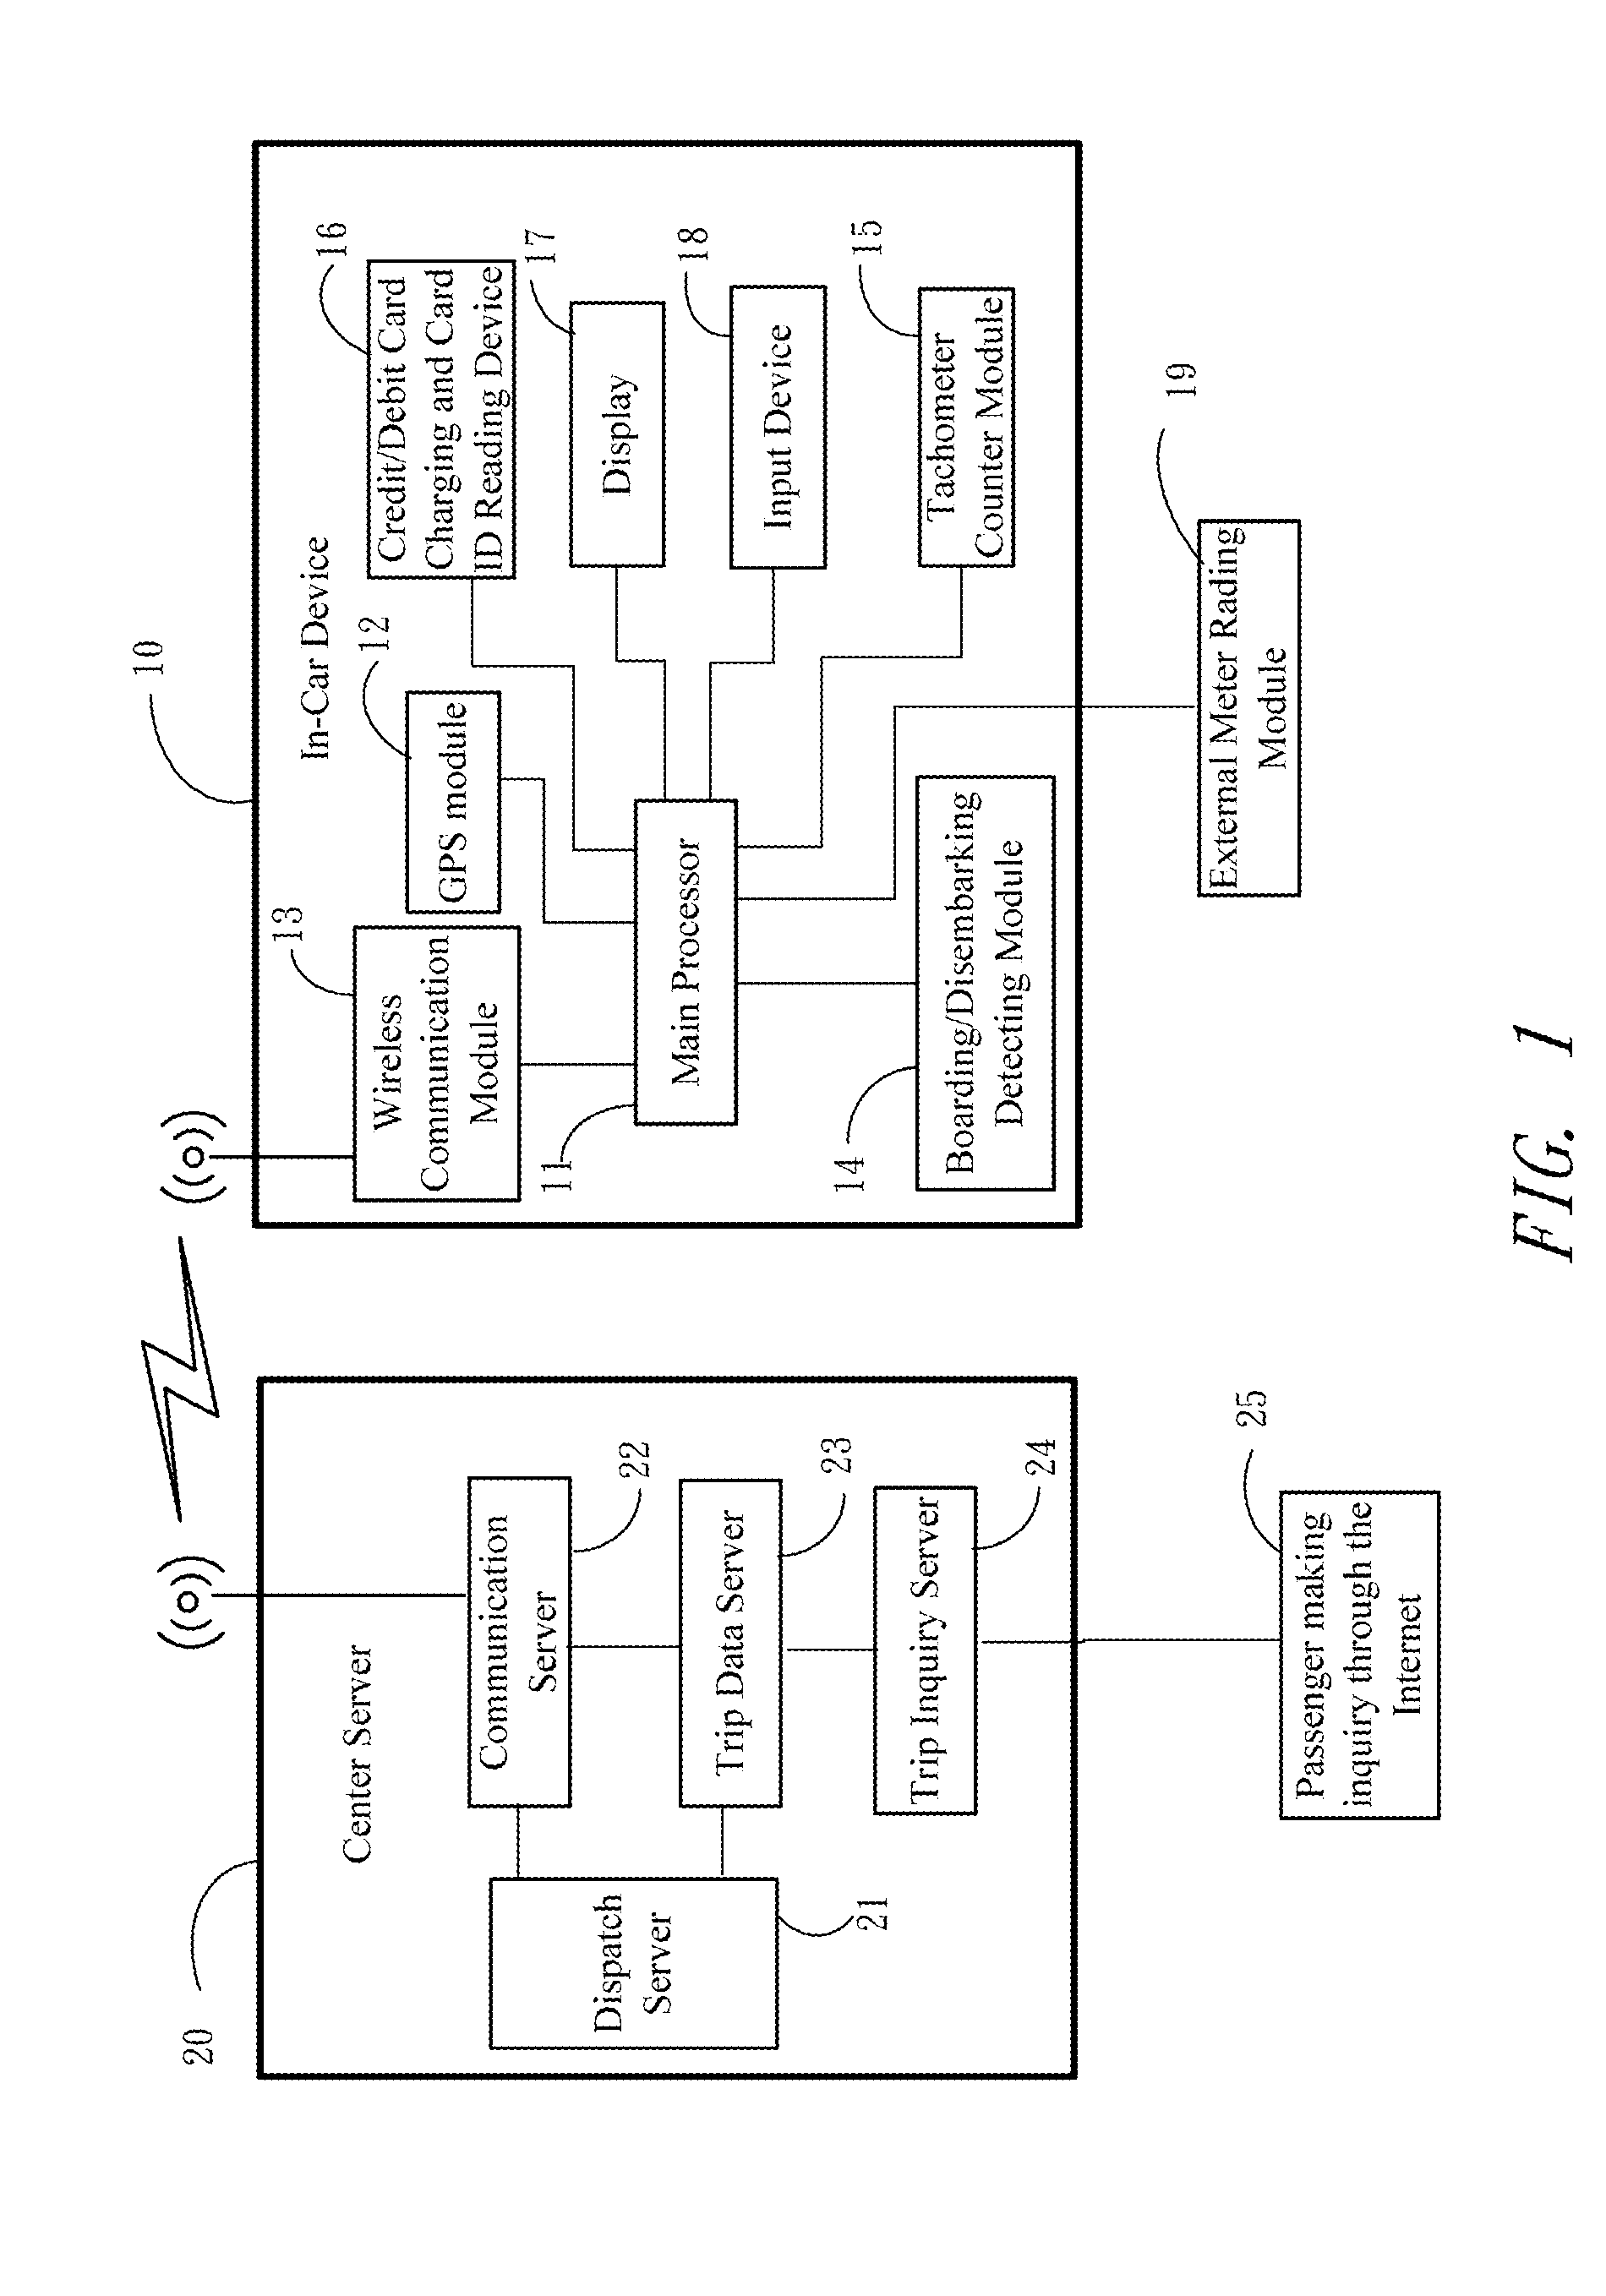 Automatic Electronic Trip Receipt Recording Method for Chauffeured Vehicles